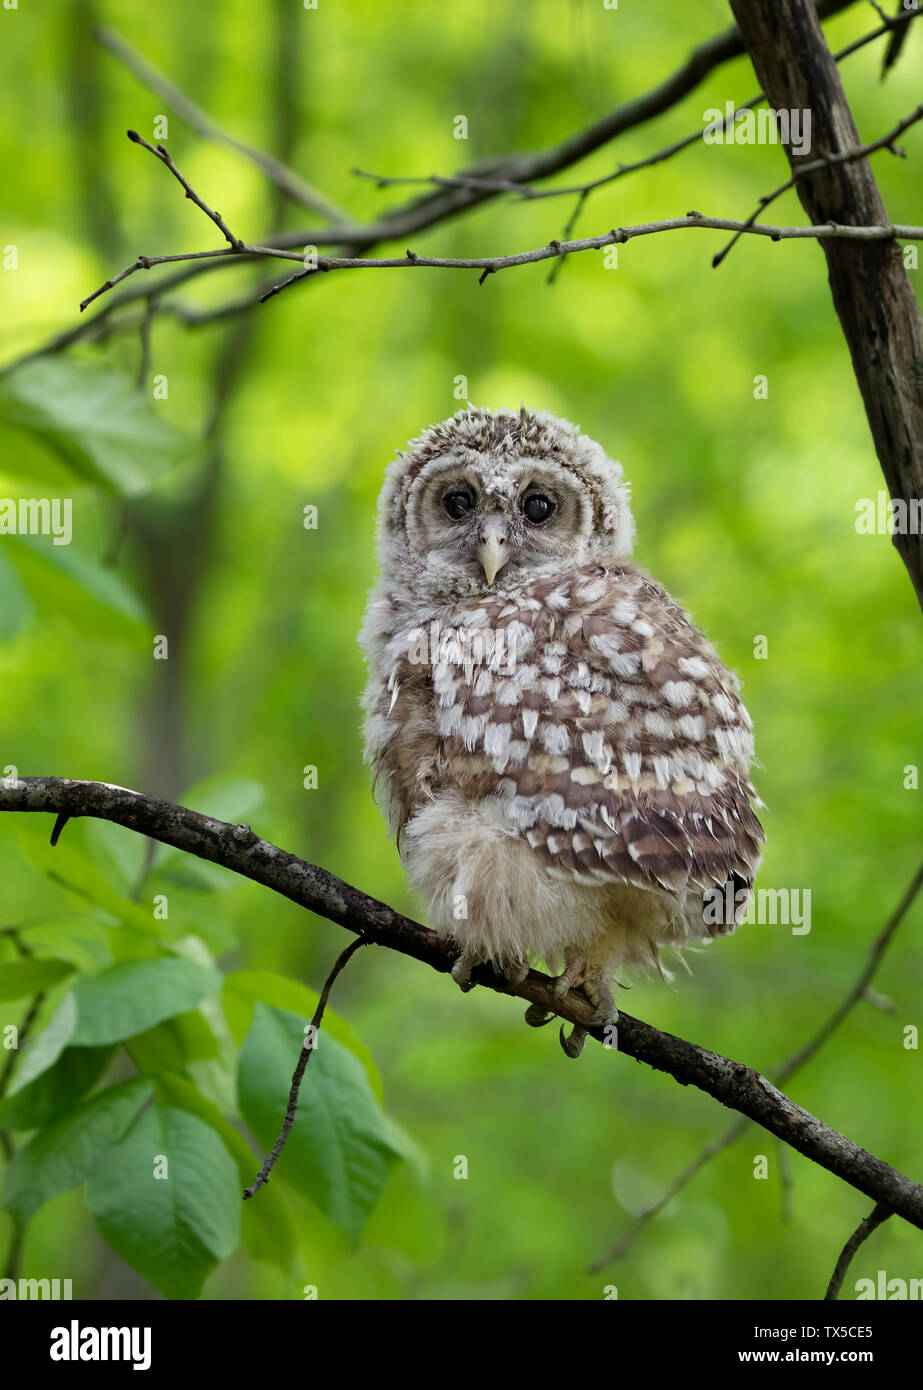 Barred owl owlet perched against a green background on a branch in the forest in Canada Stock Photo